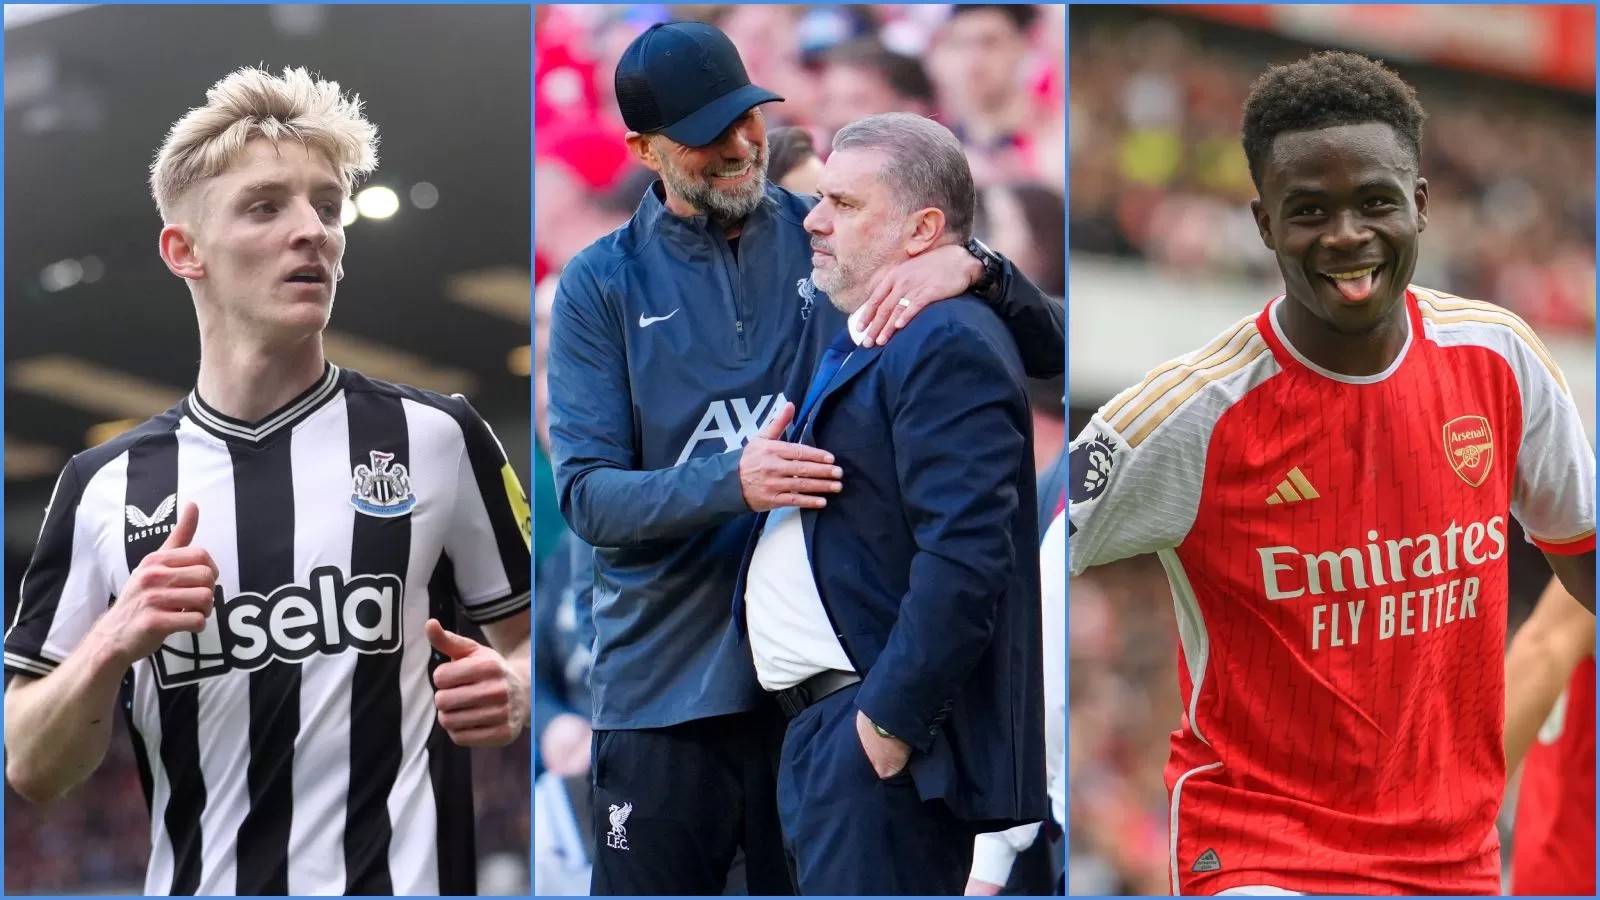 Premier League winners and losers: Moyes, Postecoglou exposed but Saka, Gordon and Chelsea impress